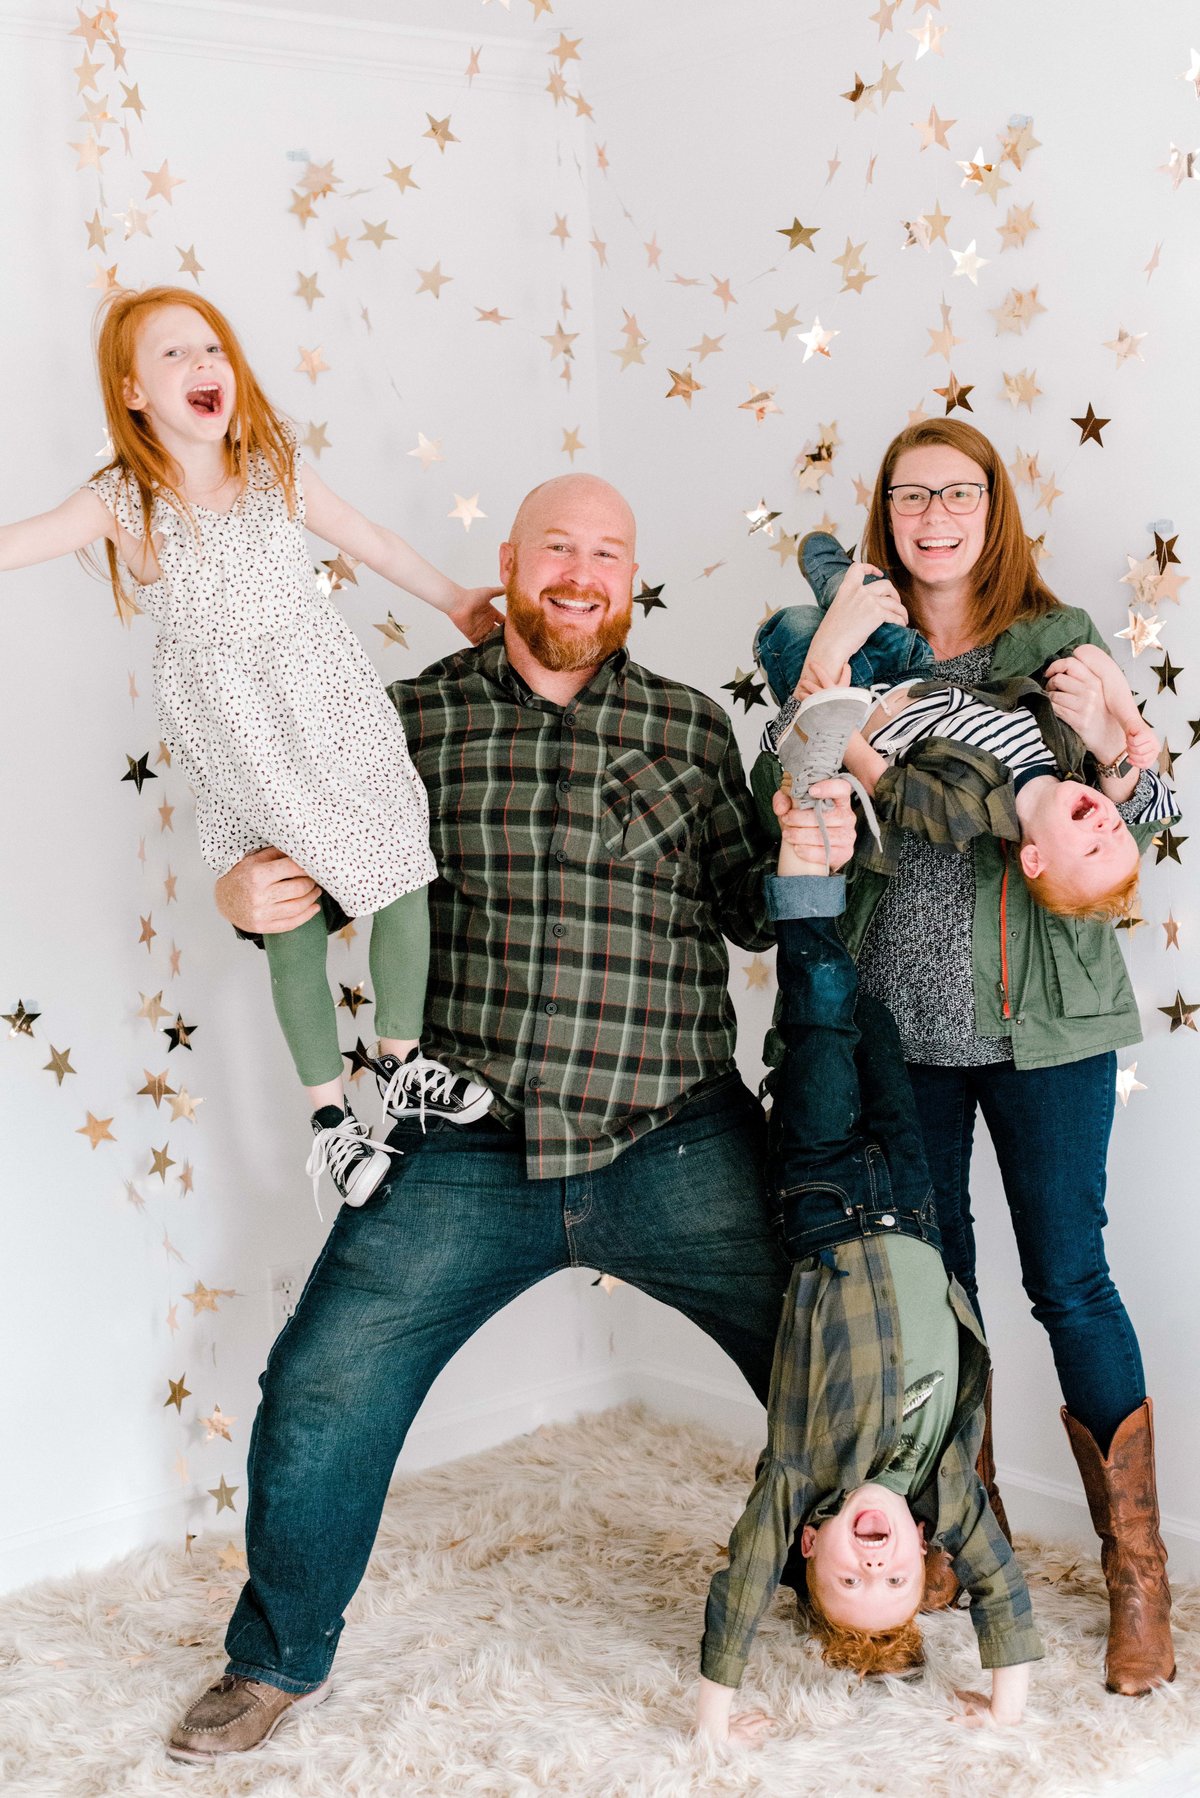 OwensbyFamily_HolidayMiniSession_SneakPeek_BeccaBPhotography-9